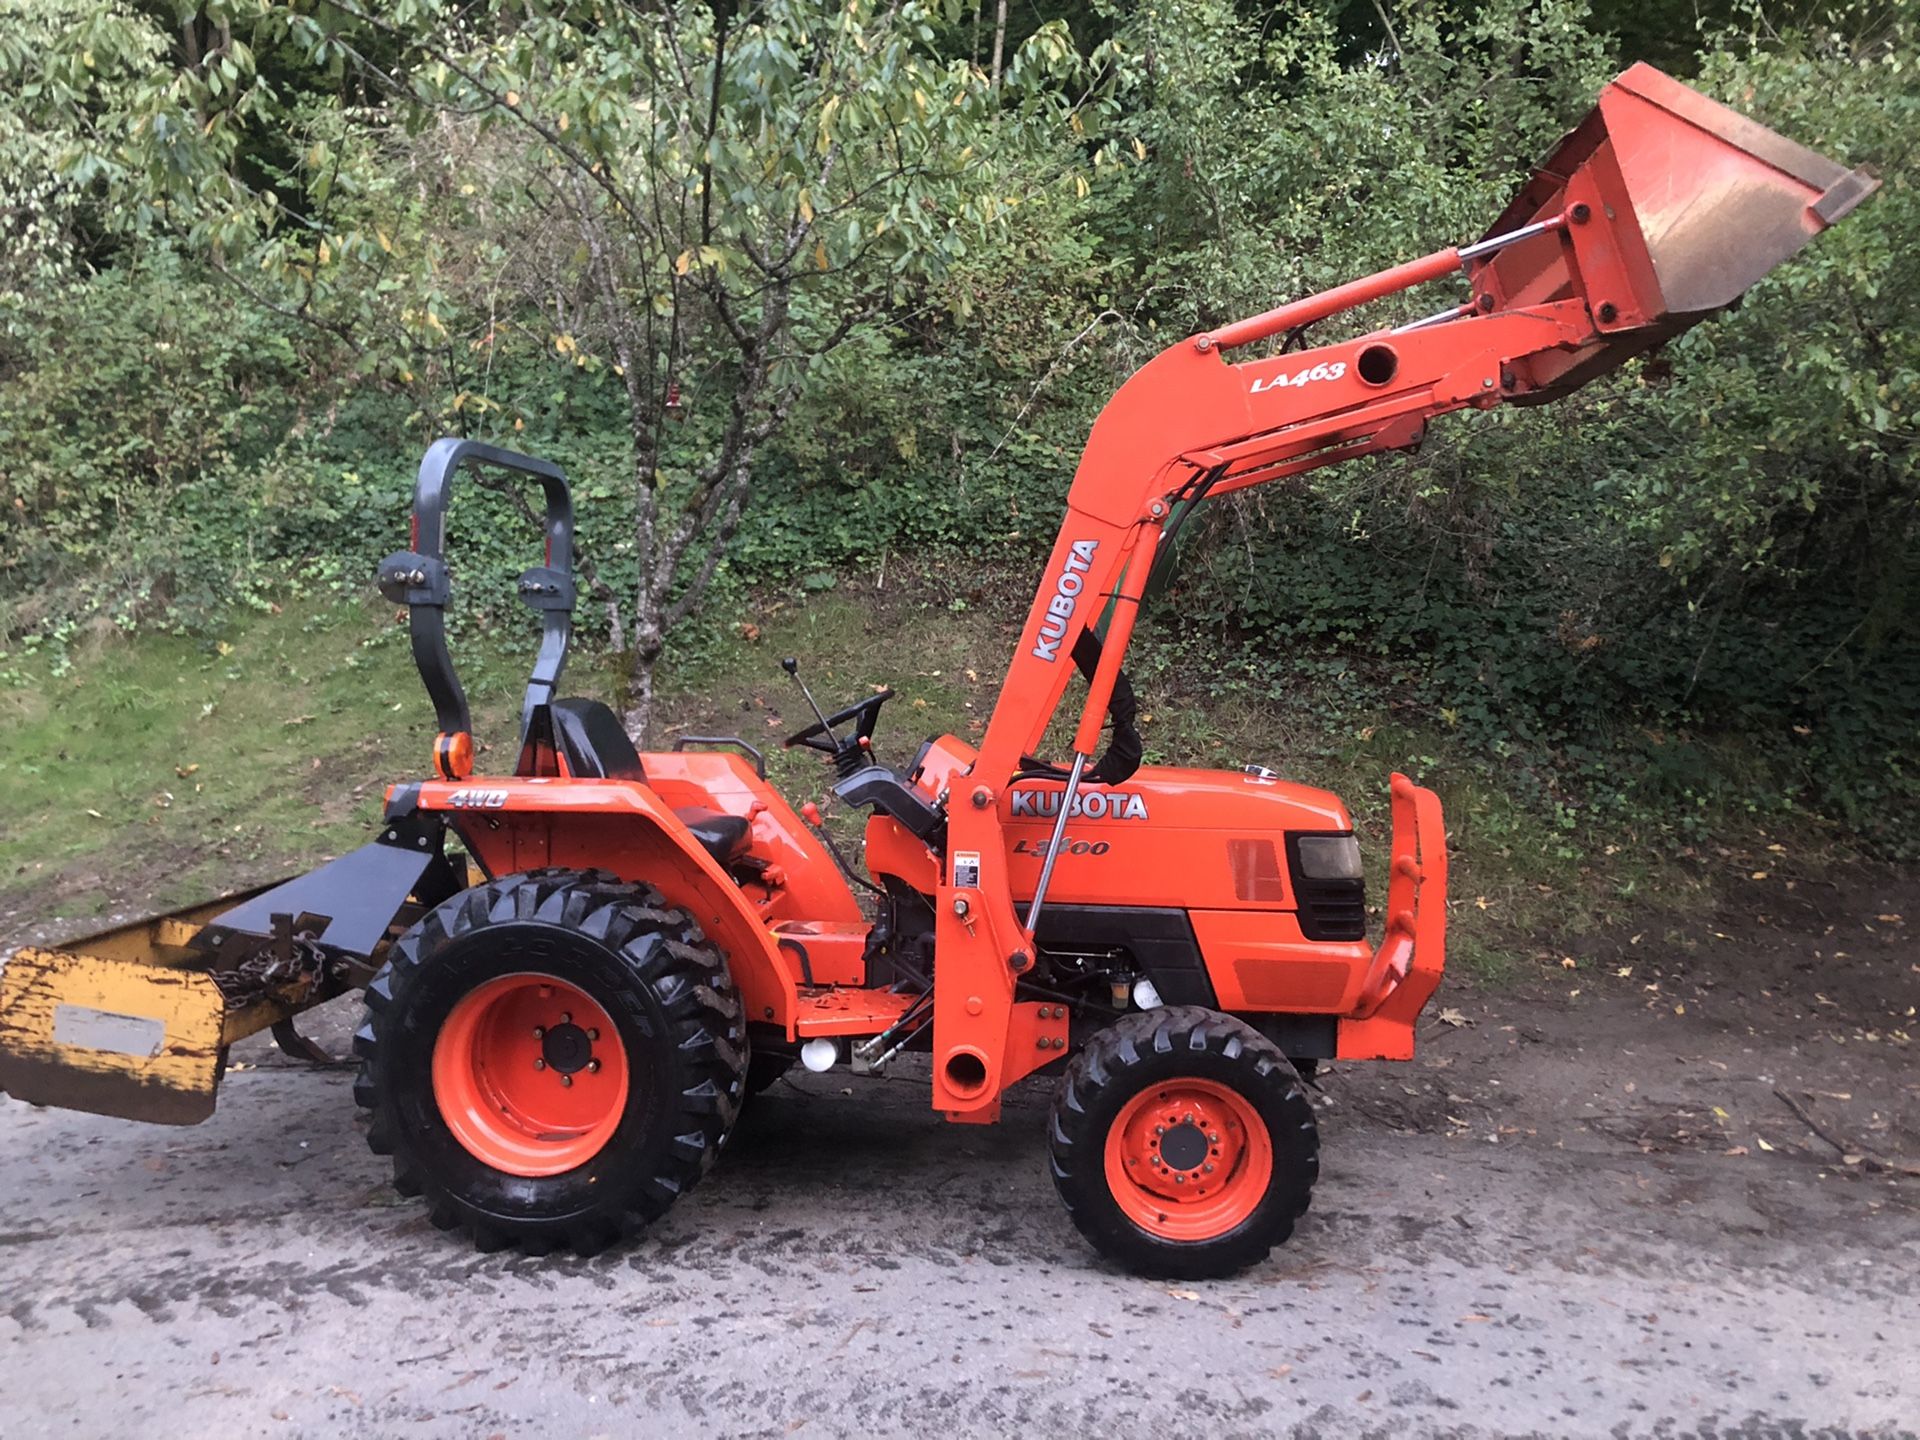 Kubota L3400 Loader And Box Blade For Sale In Kent Wa Offerup